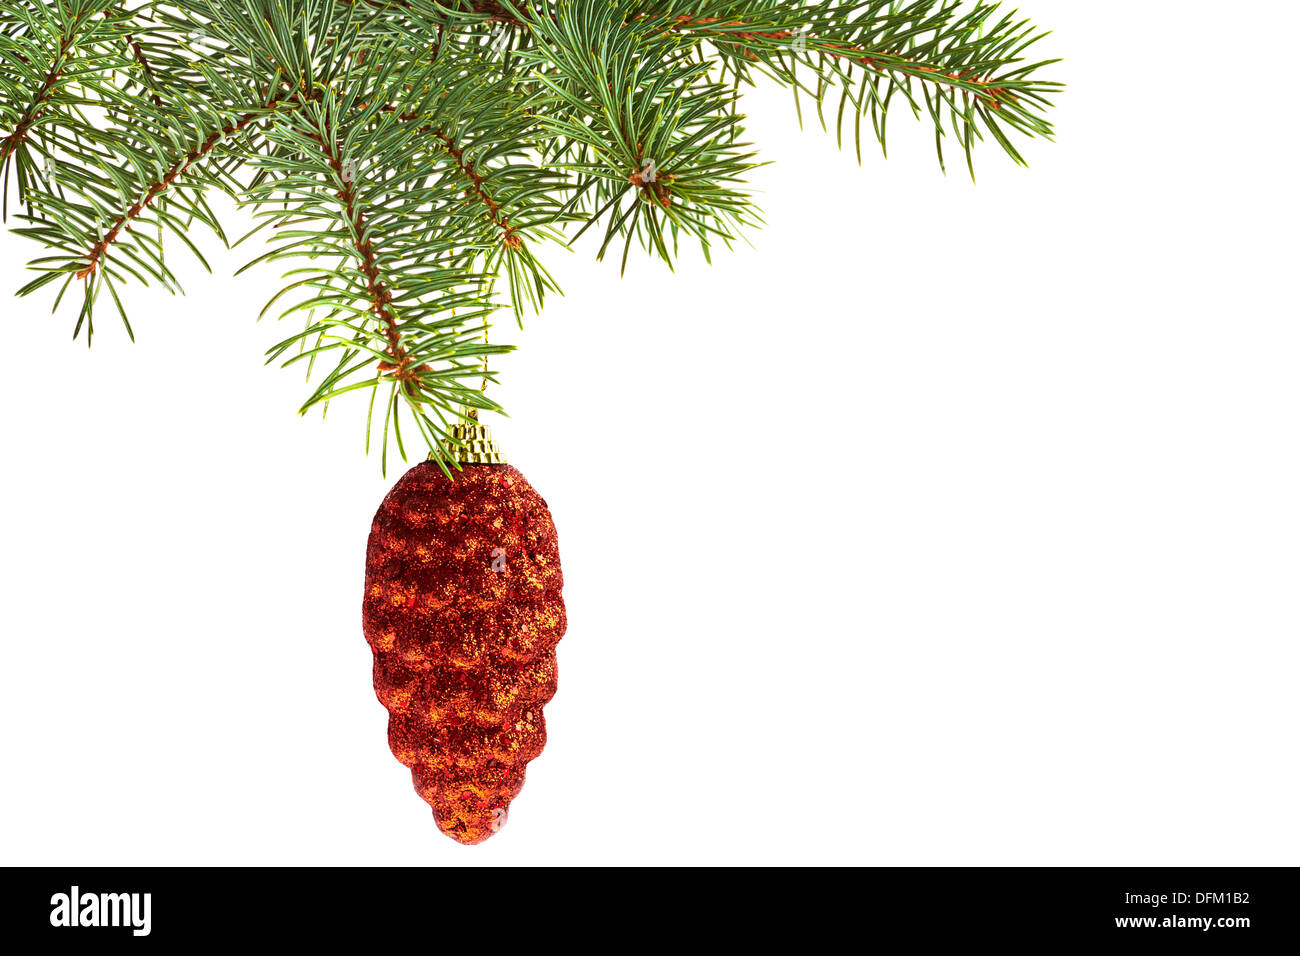 Christmas decoration. Red cone toy on Christmas tree Stock Photo